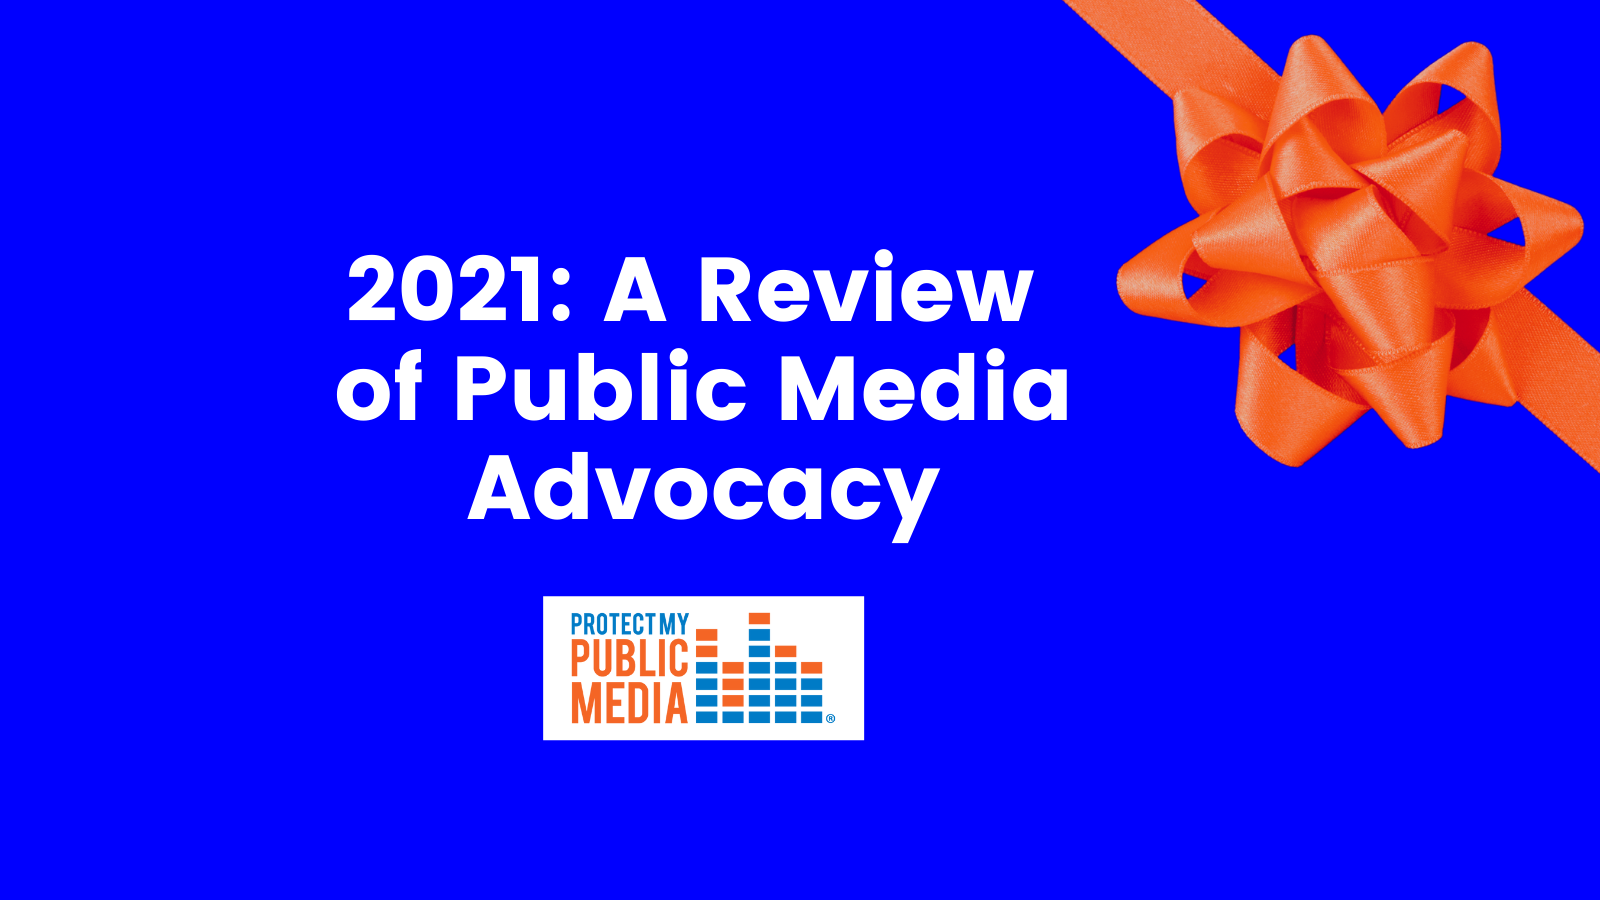 Featured image for “2021: A Review of Public Media Advocacy”